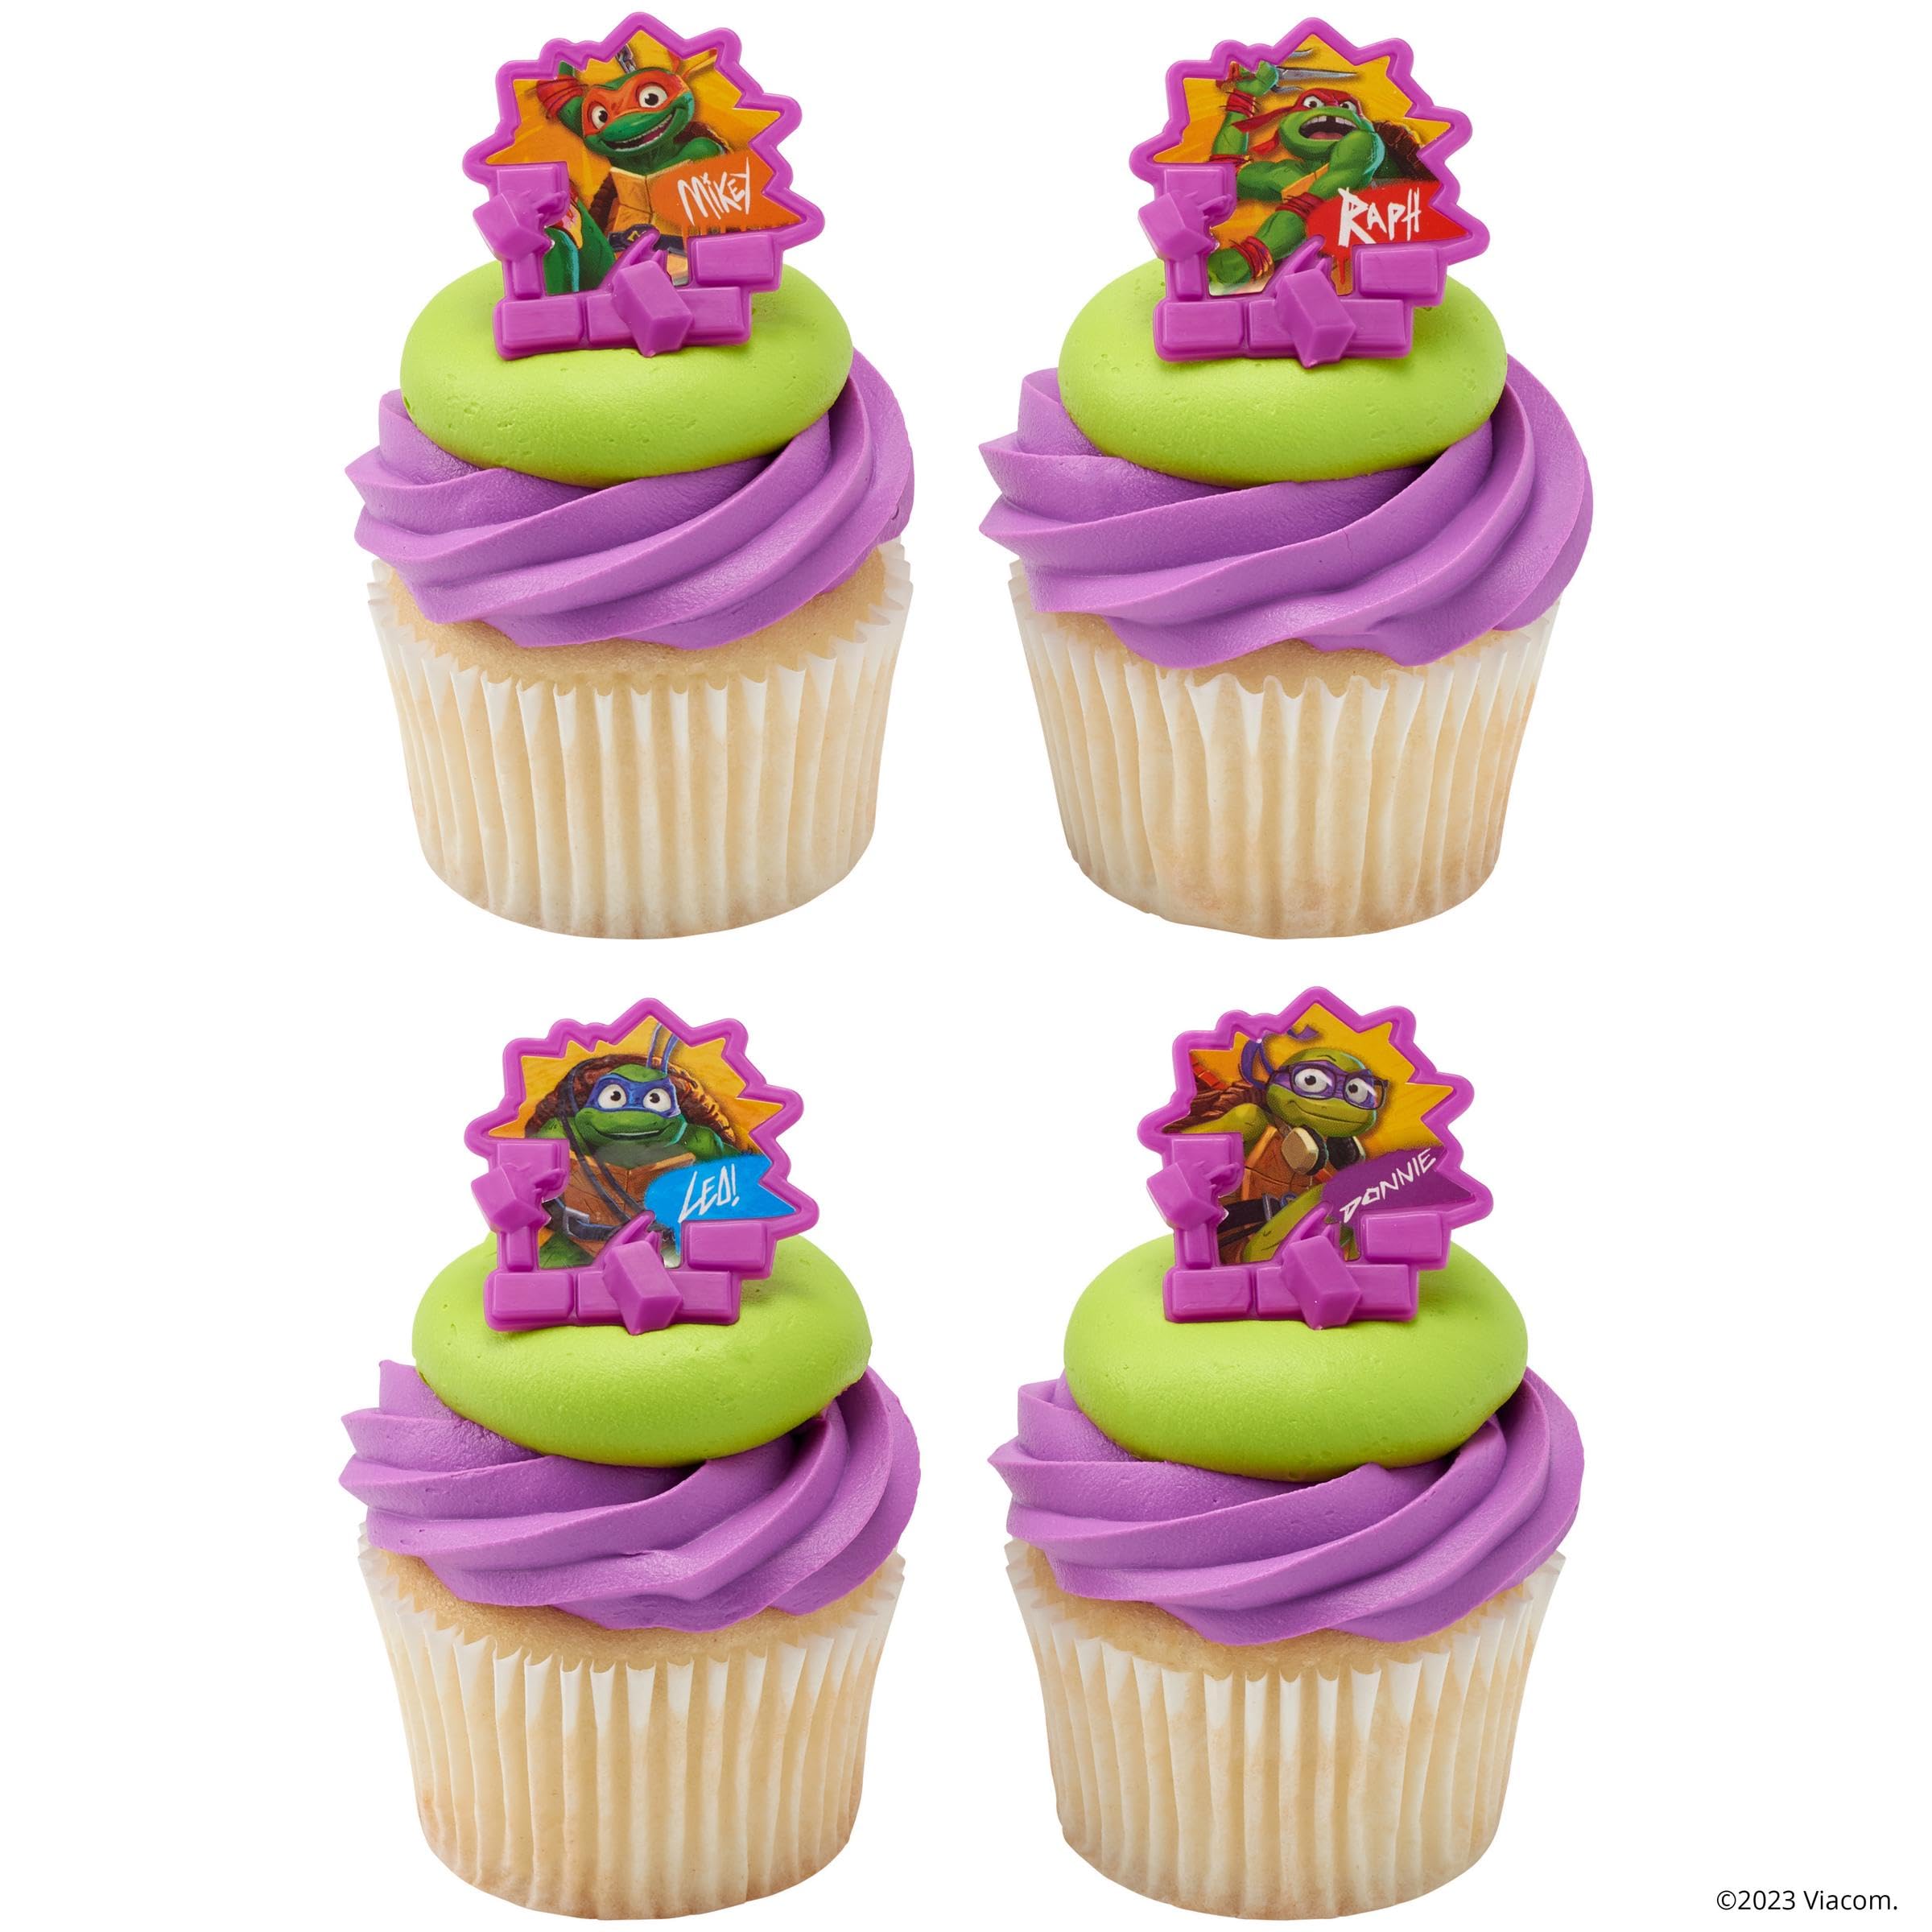 DecoPac Teenage Mutant Ninja Turtles Turtle Power Rings, Cupcake Decorations For Birthday Party, Cakes, And Celebrations - 24 Pack